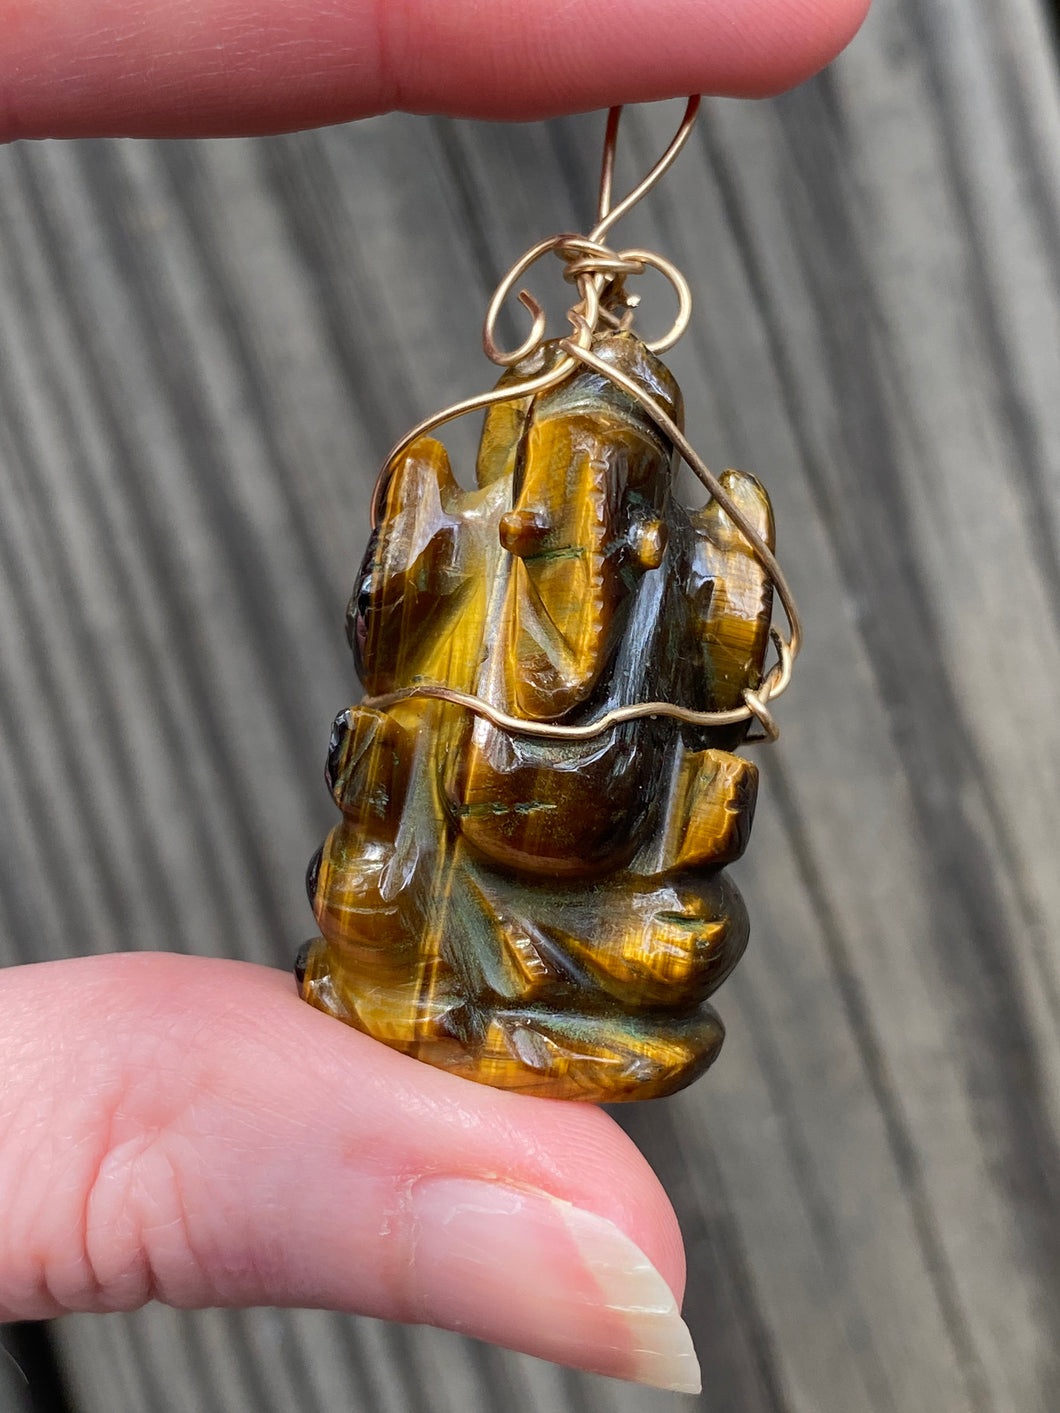 Tiger Eye carved Ganesha wire wrapped pendant